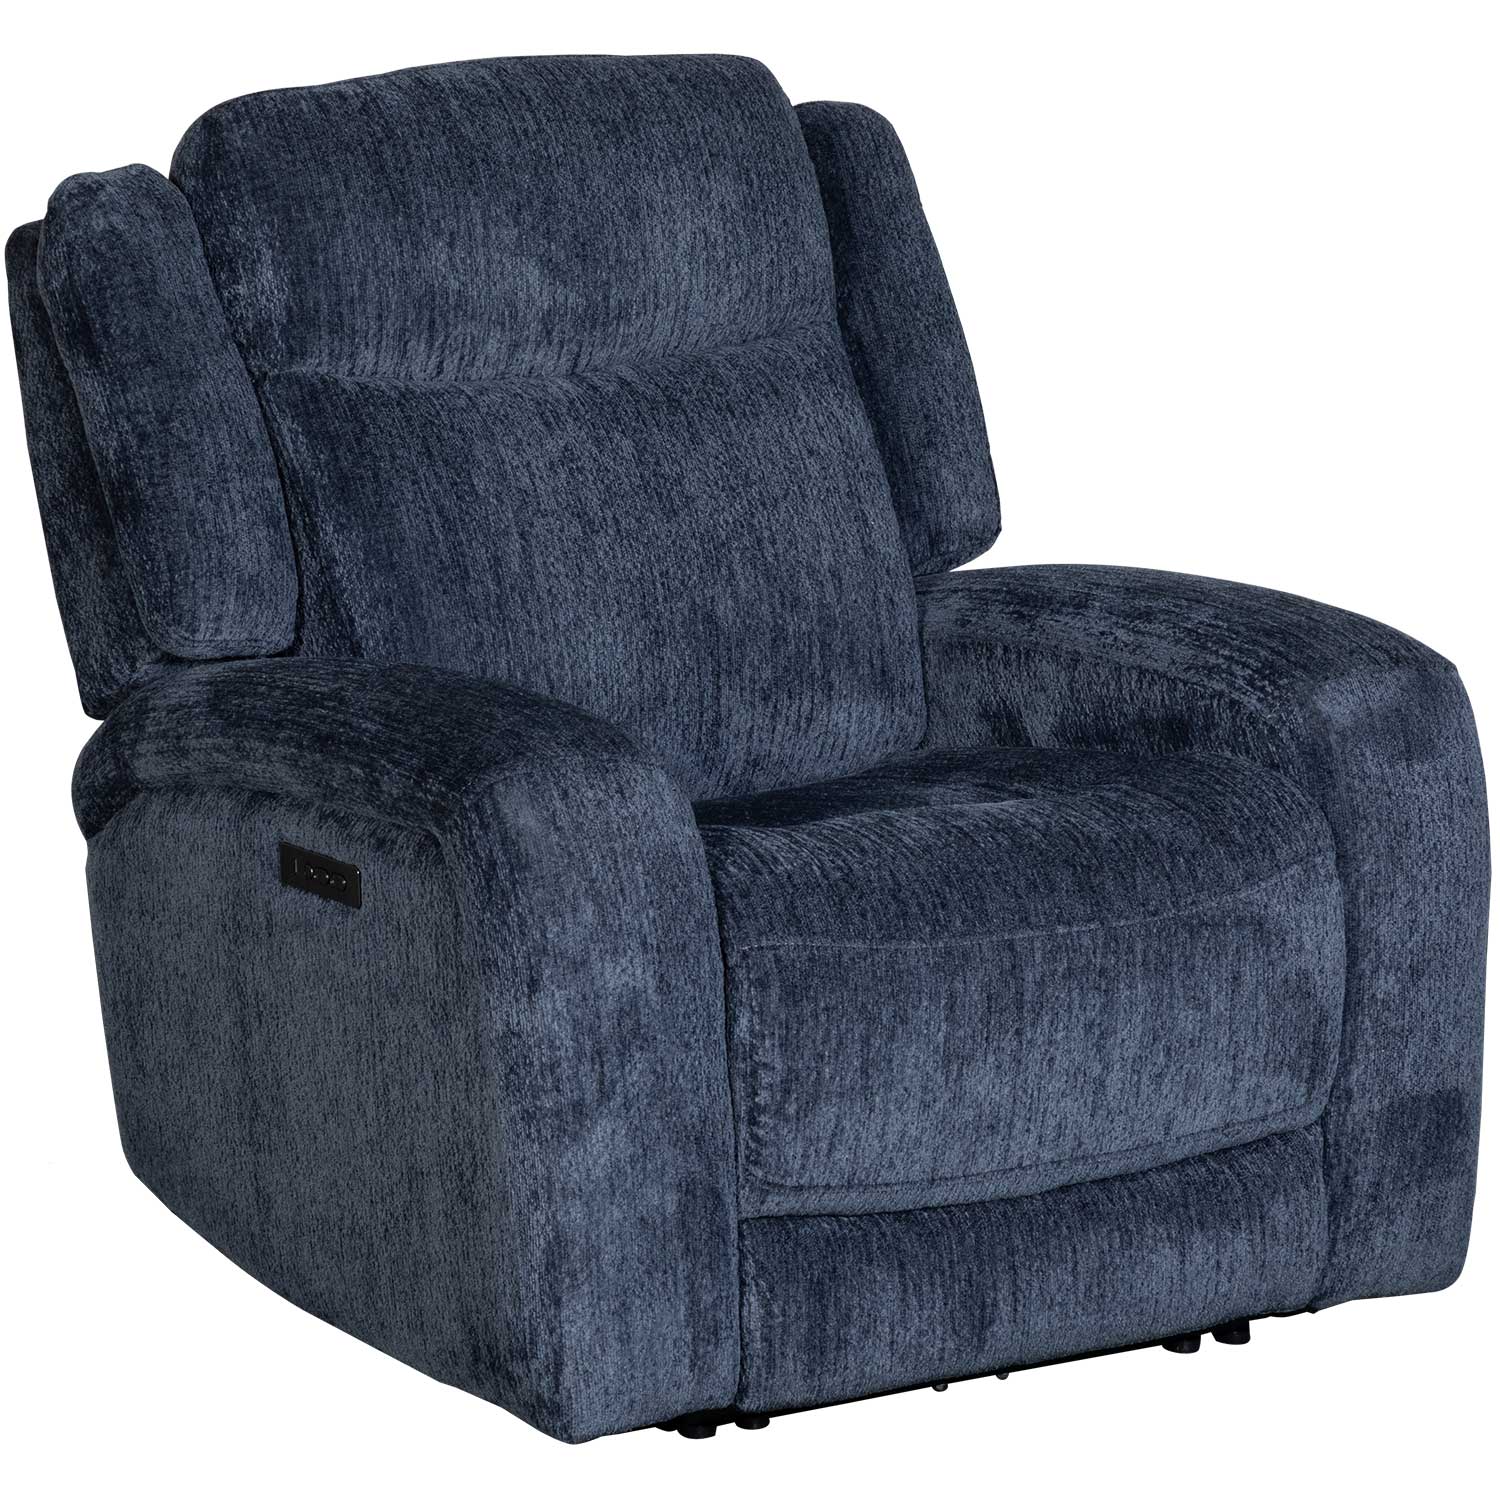 Relax In The Webster Slate Recliner